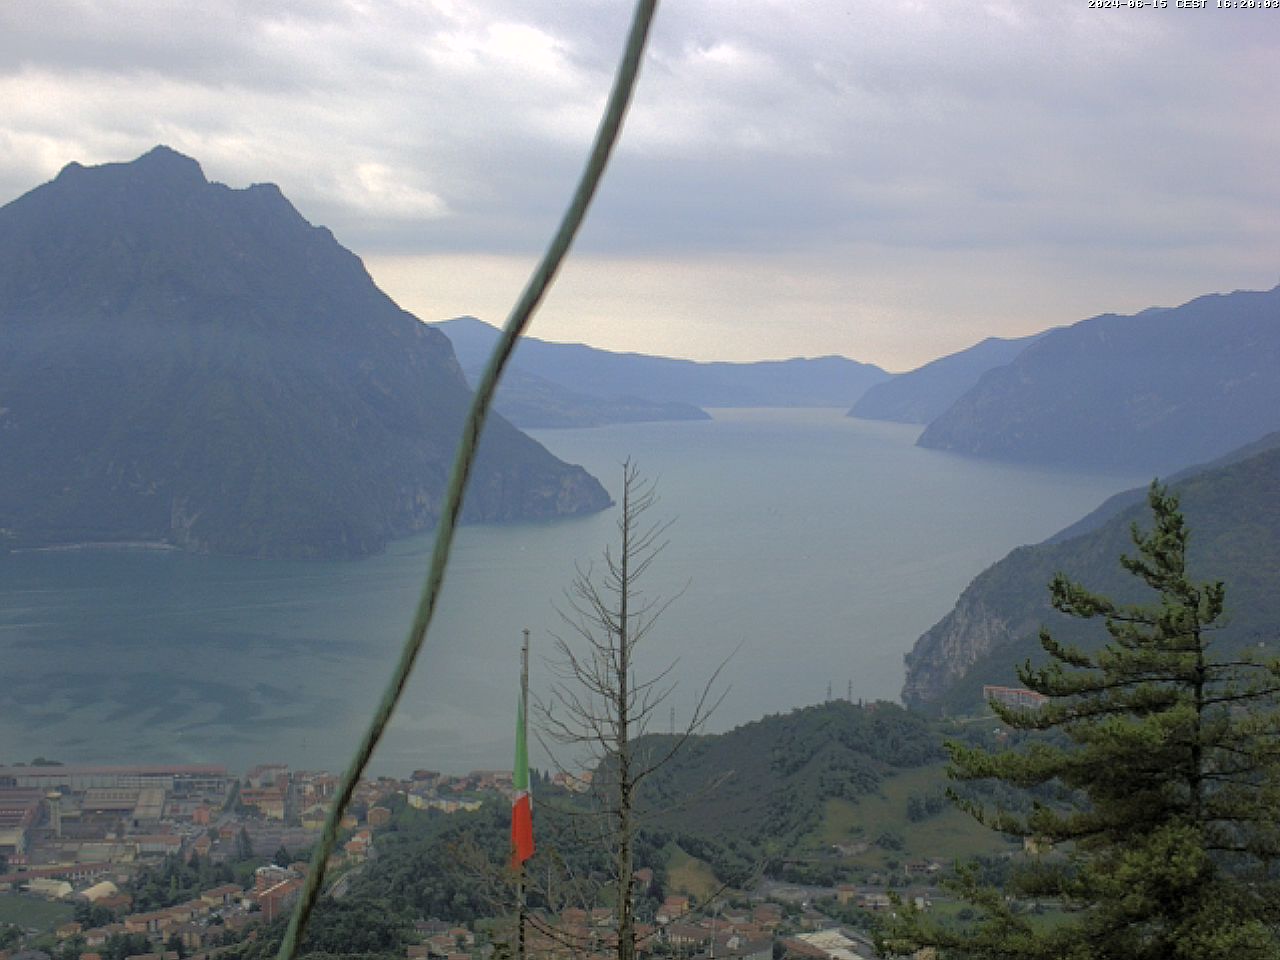 Lovere (Lac d'Iseo) Ma. 16:29